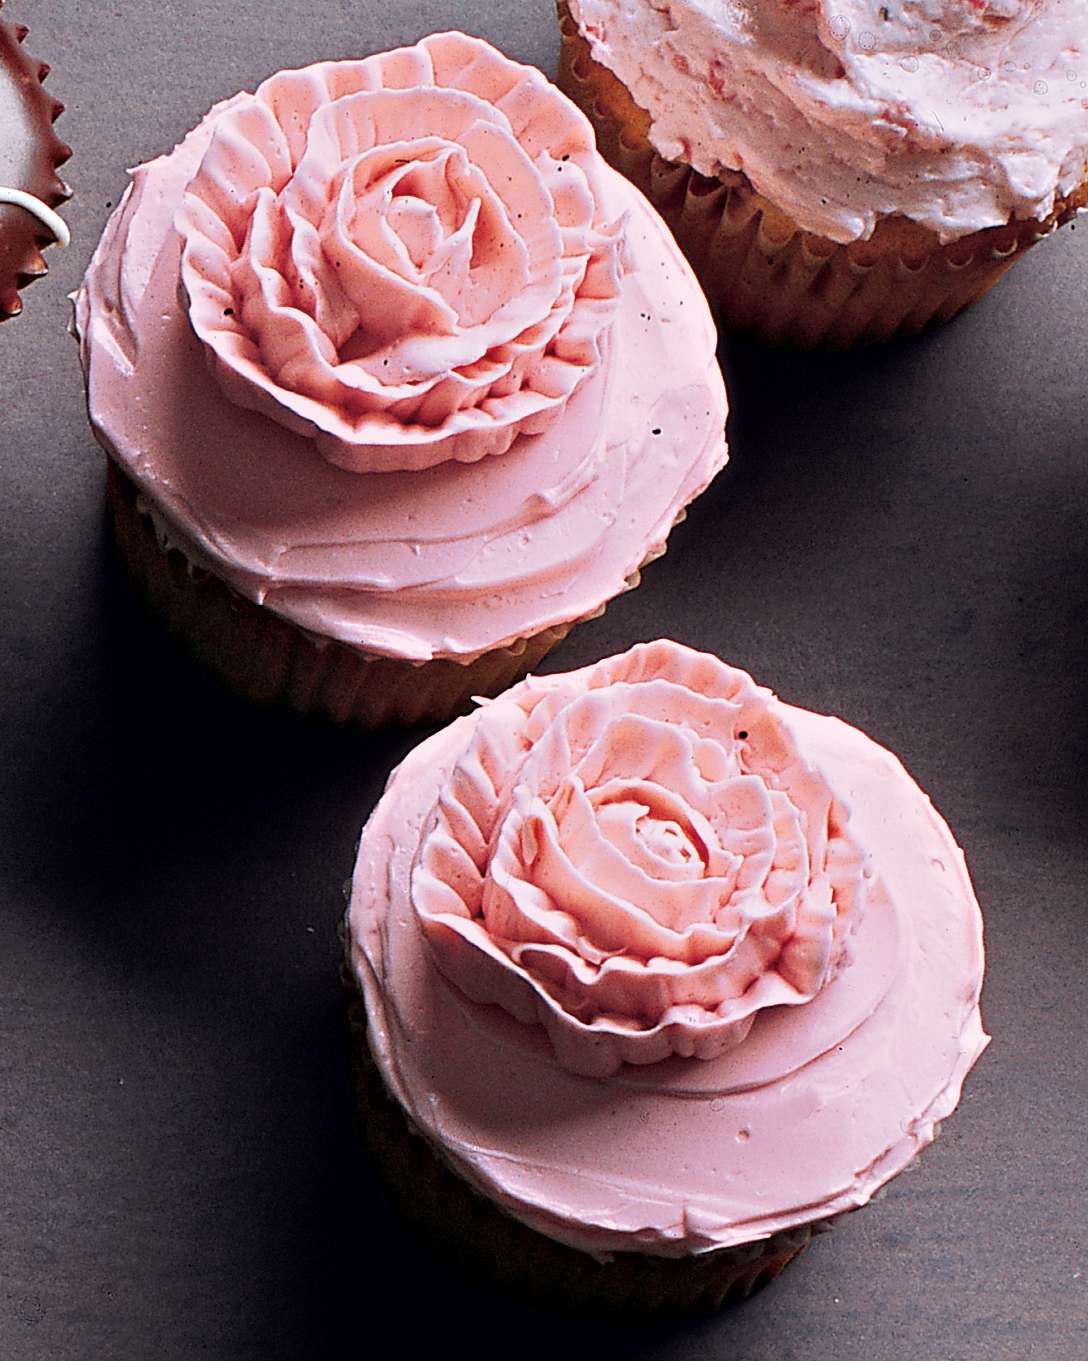 Piped-Rose Cupcakes